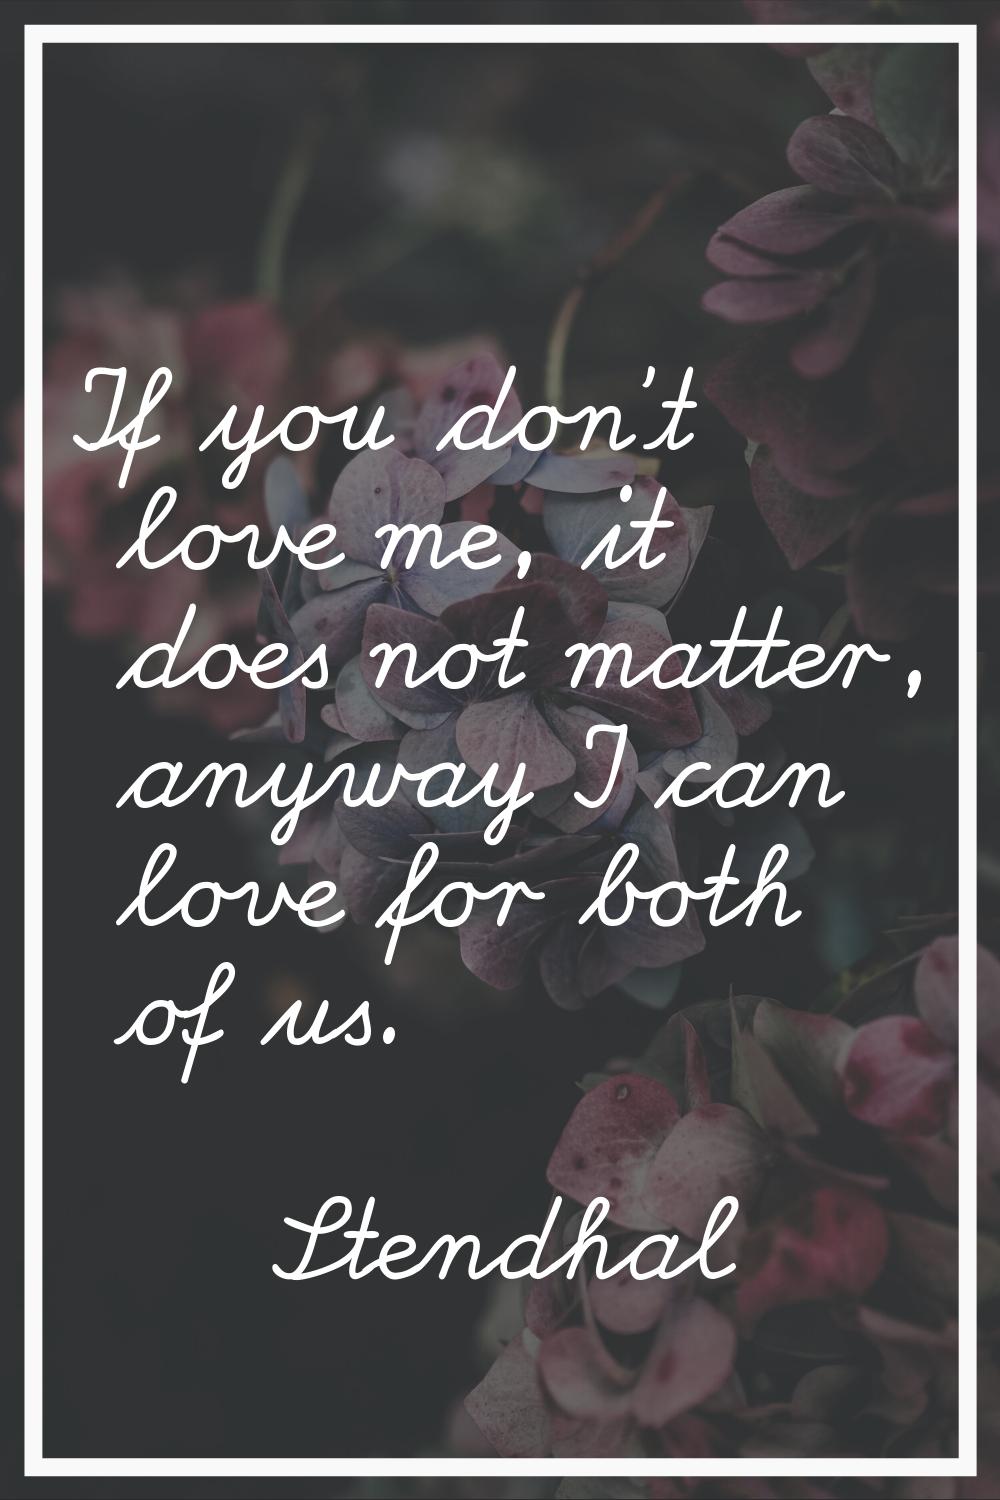 If you don't love me, it does not matter, anyway I can love for both of us.